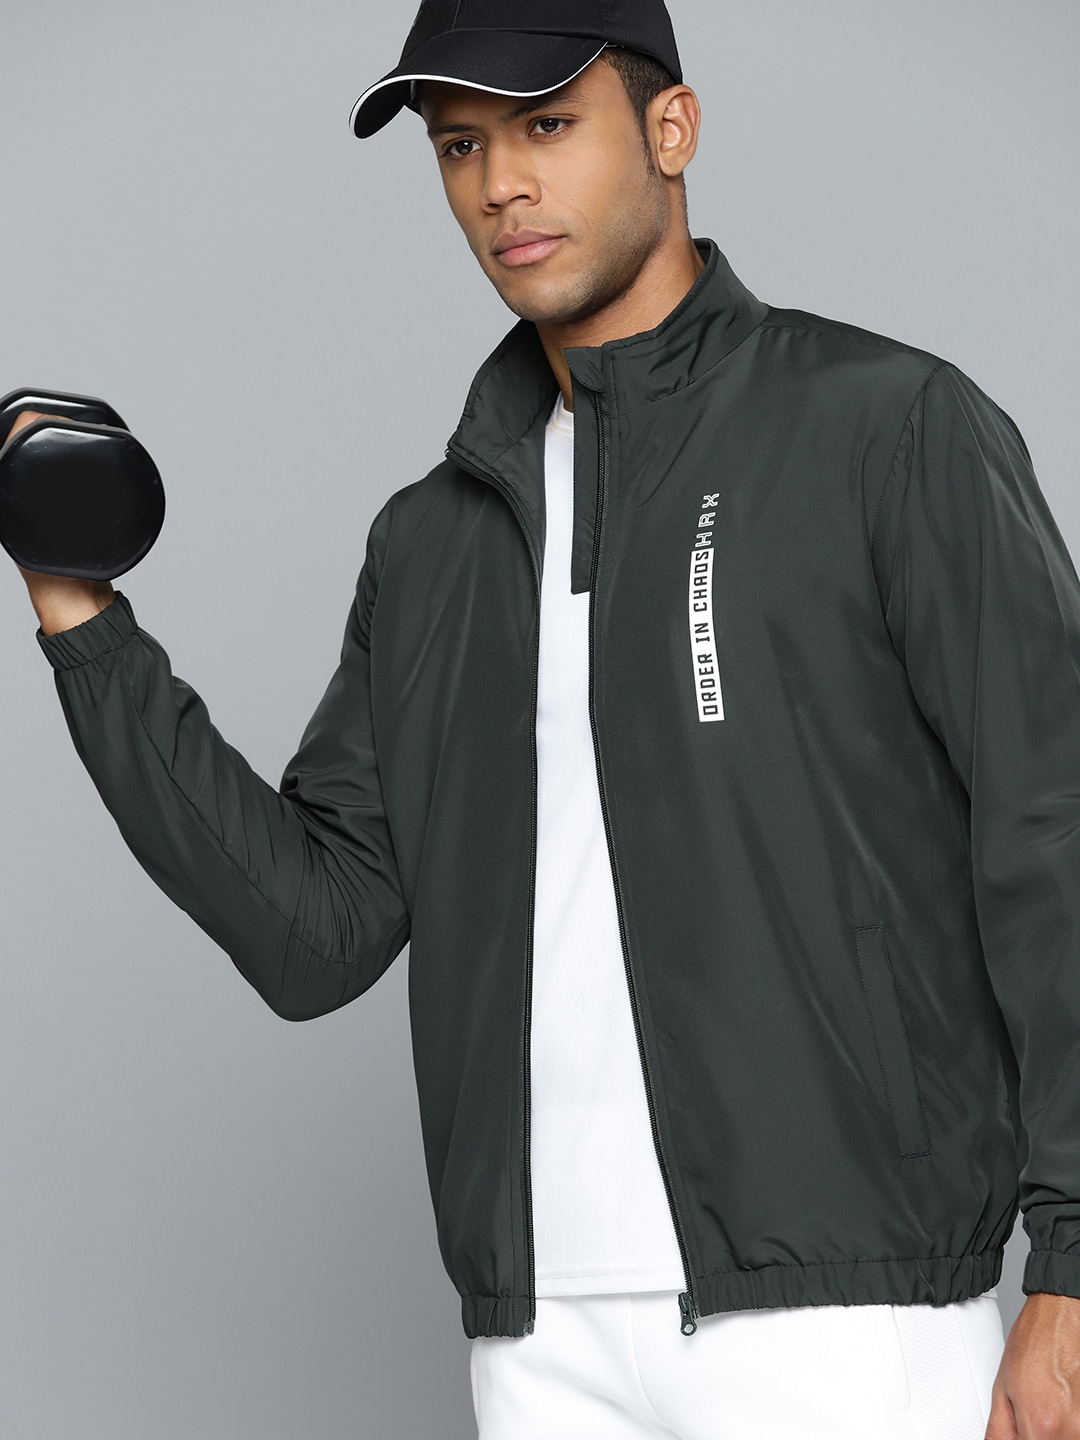 Buy hrx jacket for men stylish in India @ Limeroad-calidas.vn